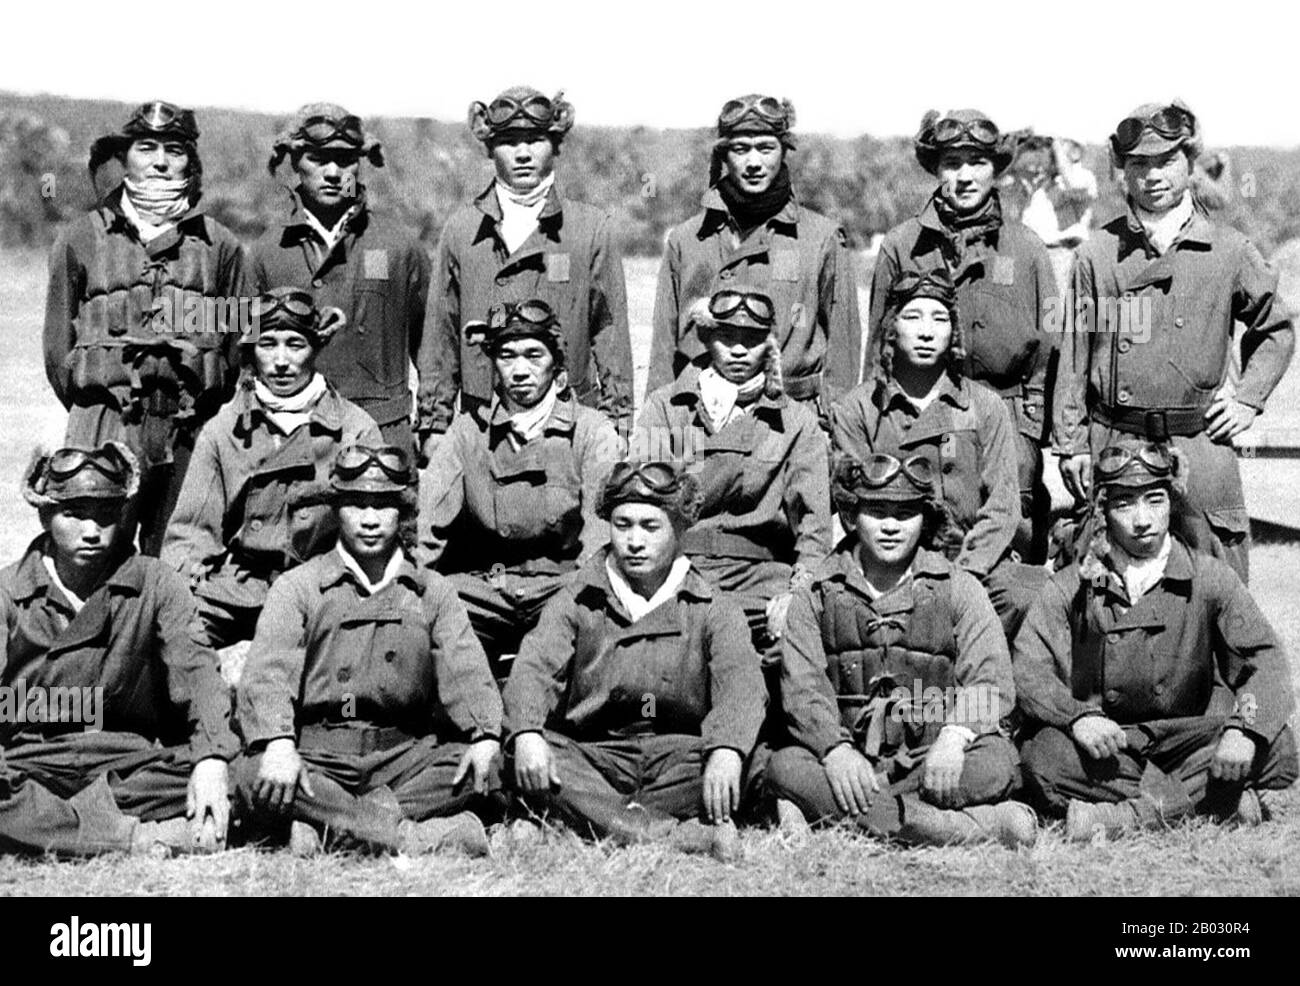 Several of these aviators were among the top Japanese aces, including: Saburo Sakai (middle row, second from left), Toshio Ota (far left, second row) and Hiroyoshi Nishizawa (standing, first on left).  The Tainan Air Group was formed in October 1941 in Japanese-occupied Formosa (Taiwan) and was one of the best known and most successful air groups of the Imperial Japanese Navy Air Service. Stock Photo